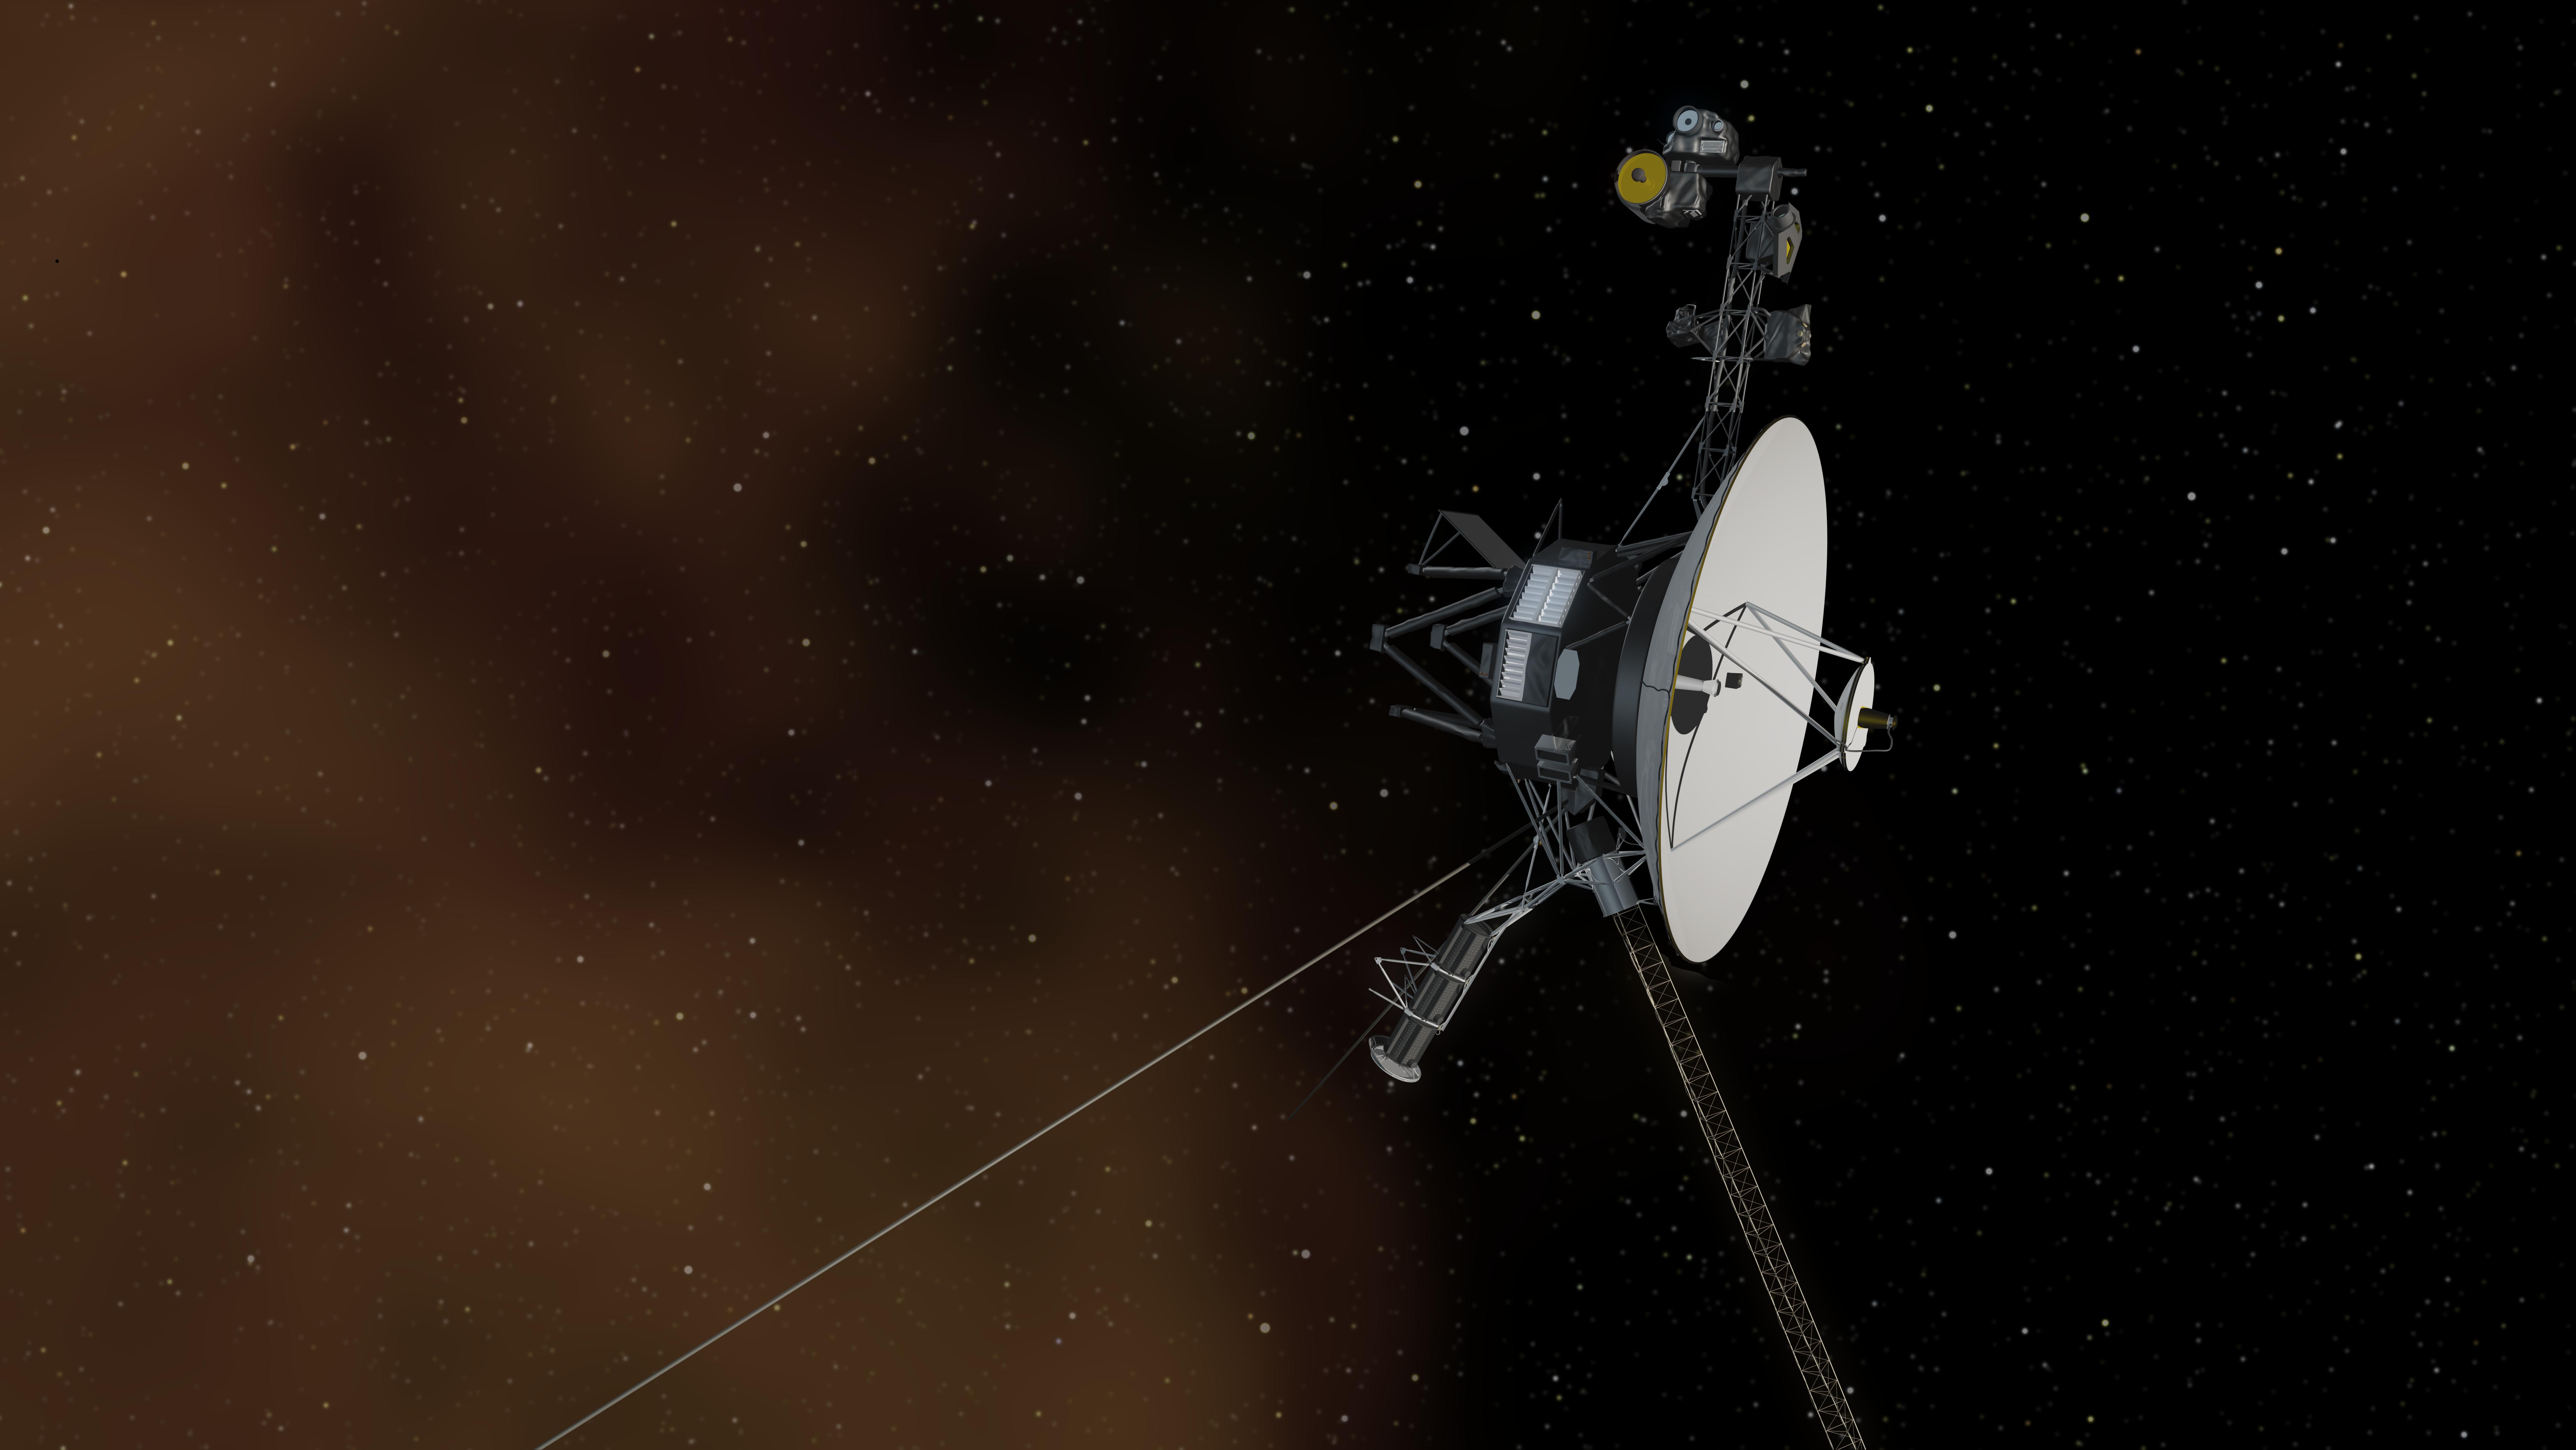 This artist's concept depicts one of NASA's Voyager spacecraft entering interstellar space